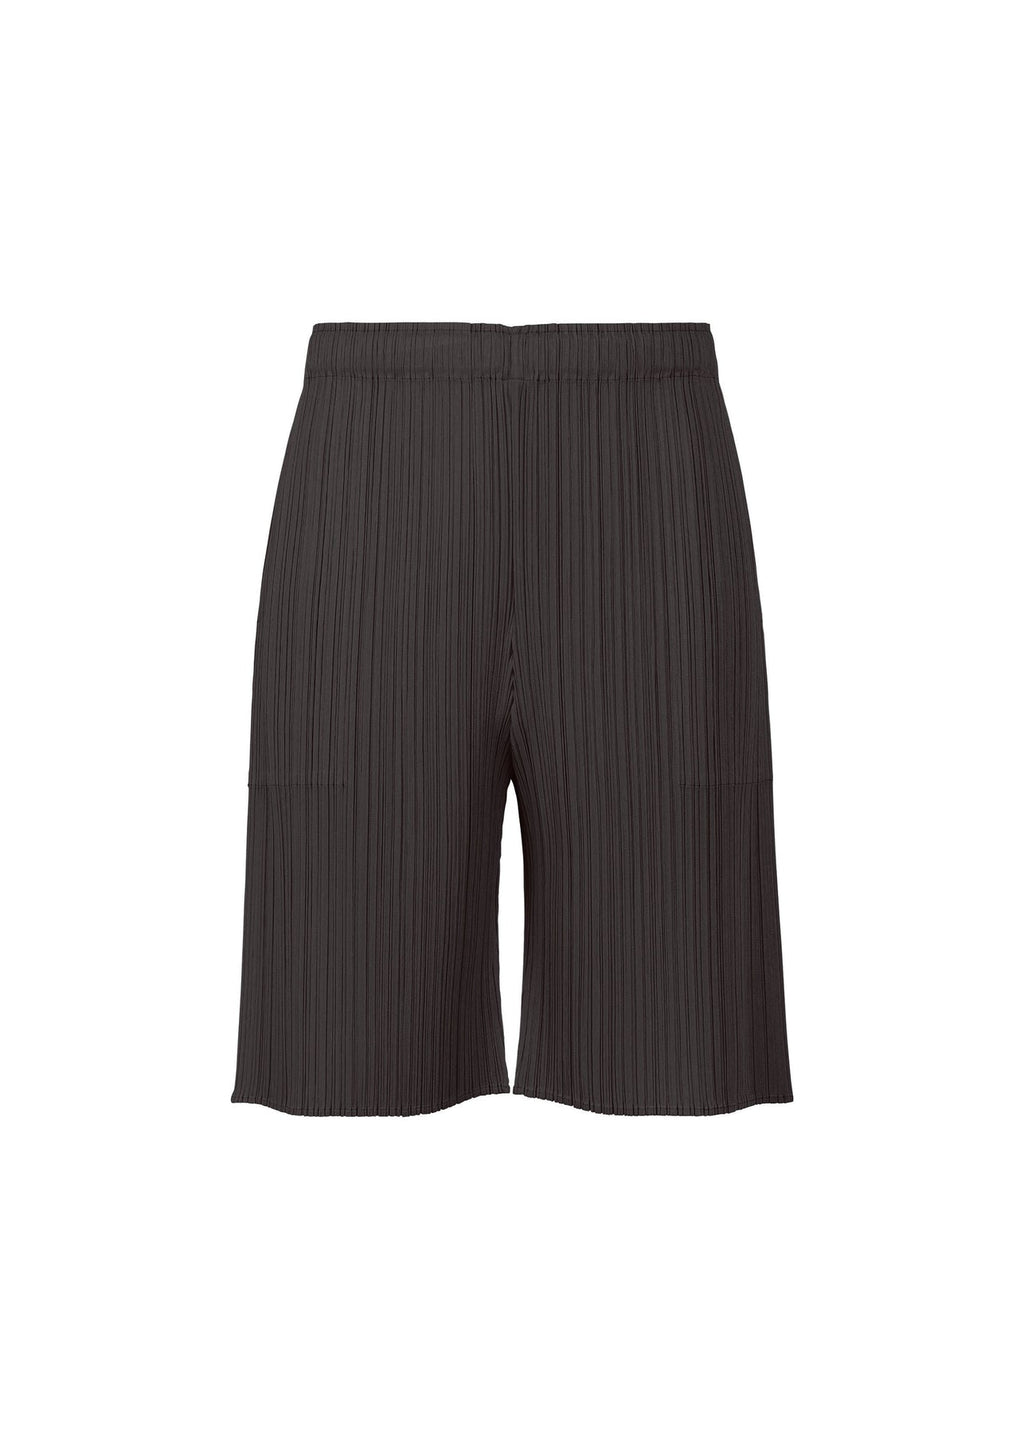 PLEATS PLEASE ISSEY MIYAKE Women Monthly Colors: April Shorts